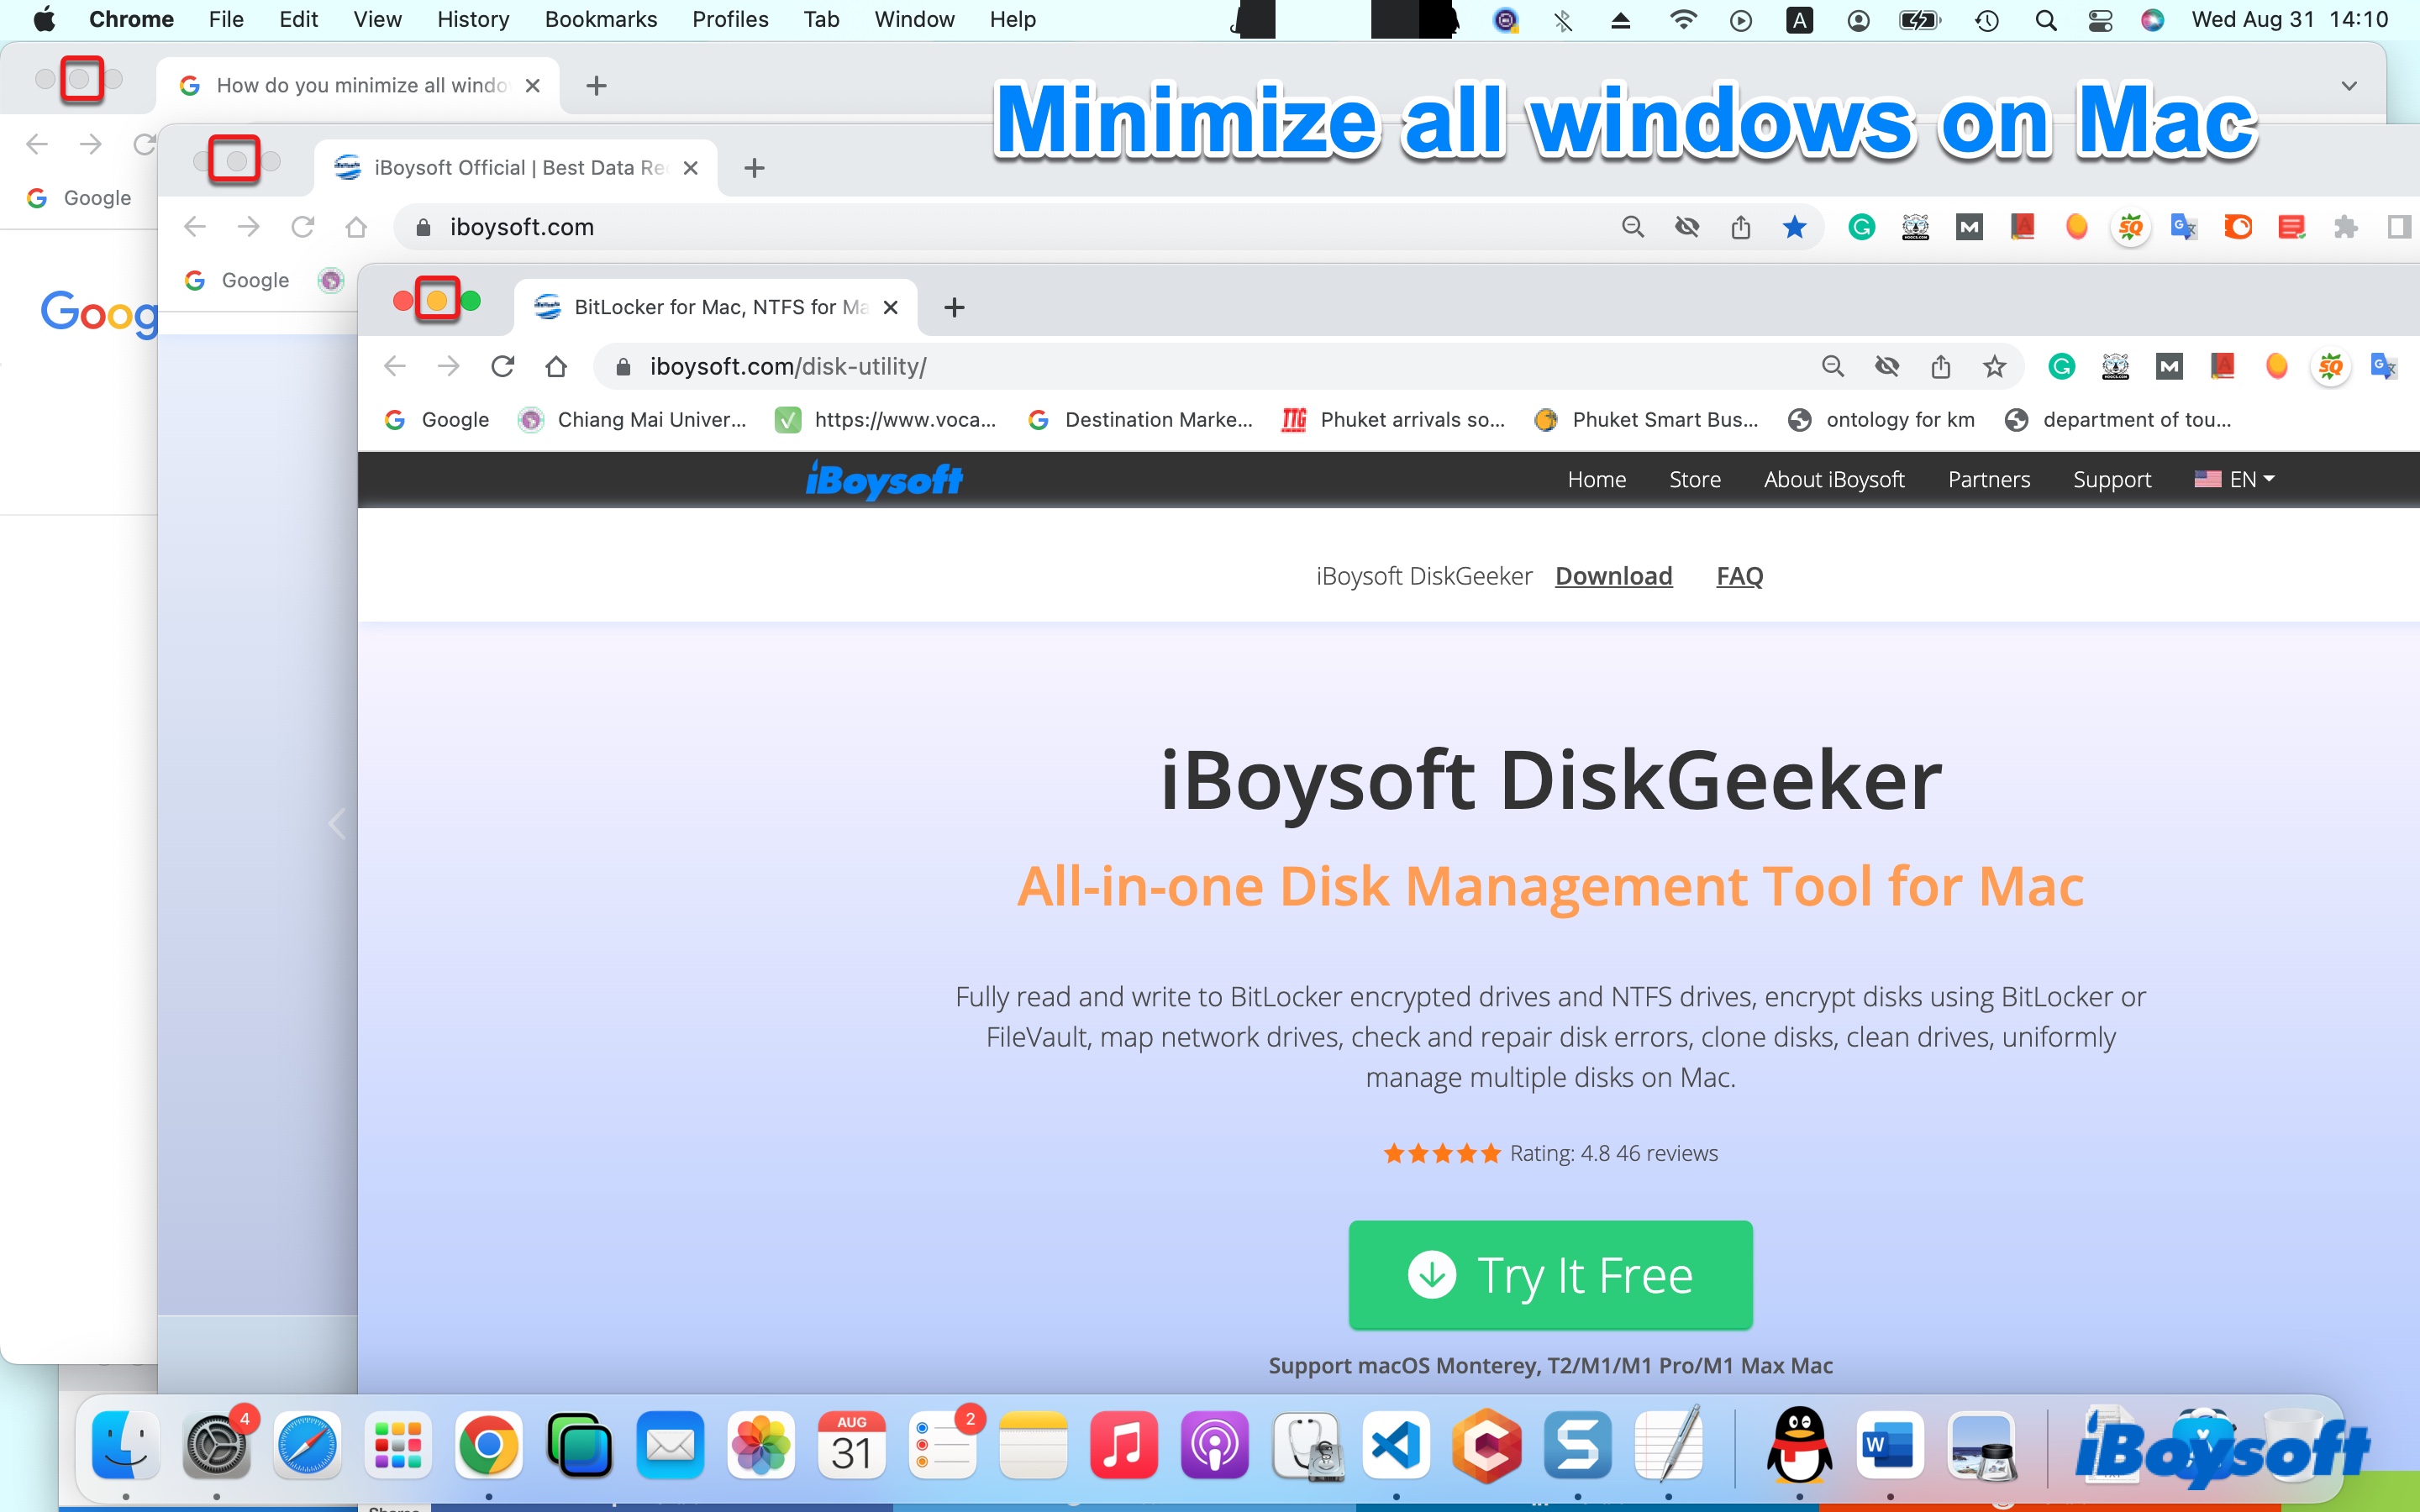 How to minimize all windows on Mac